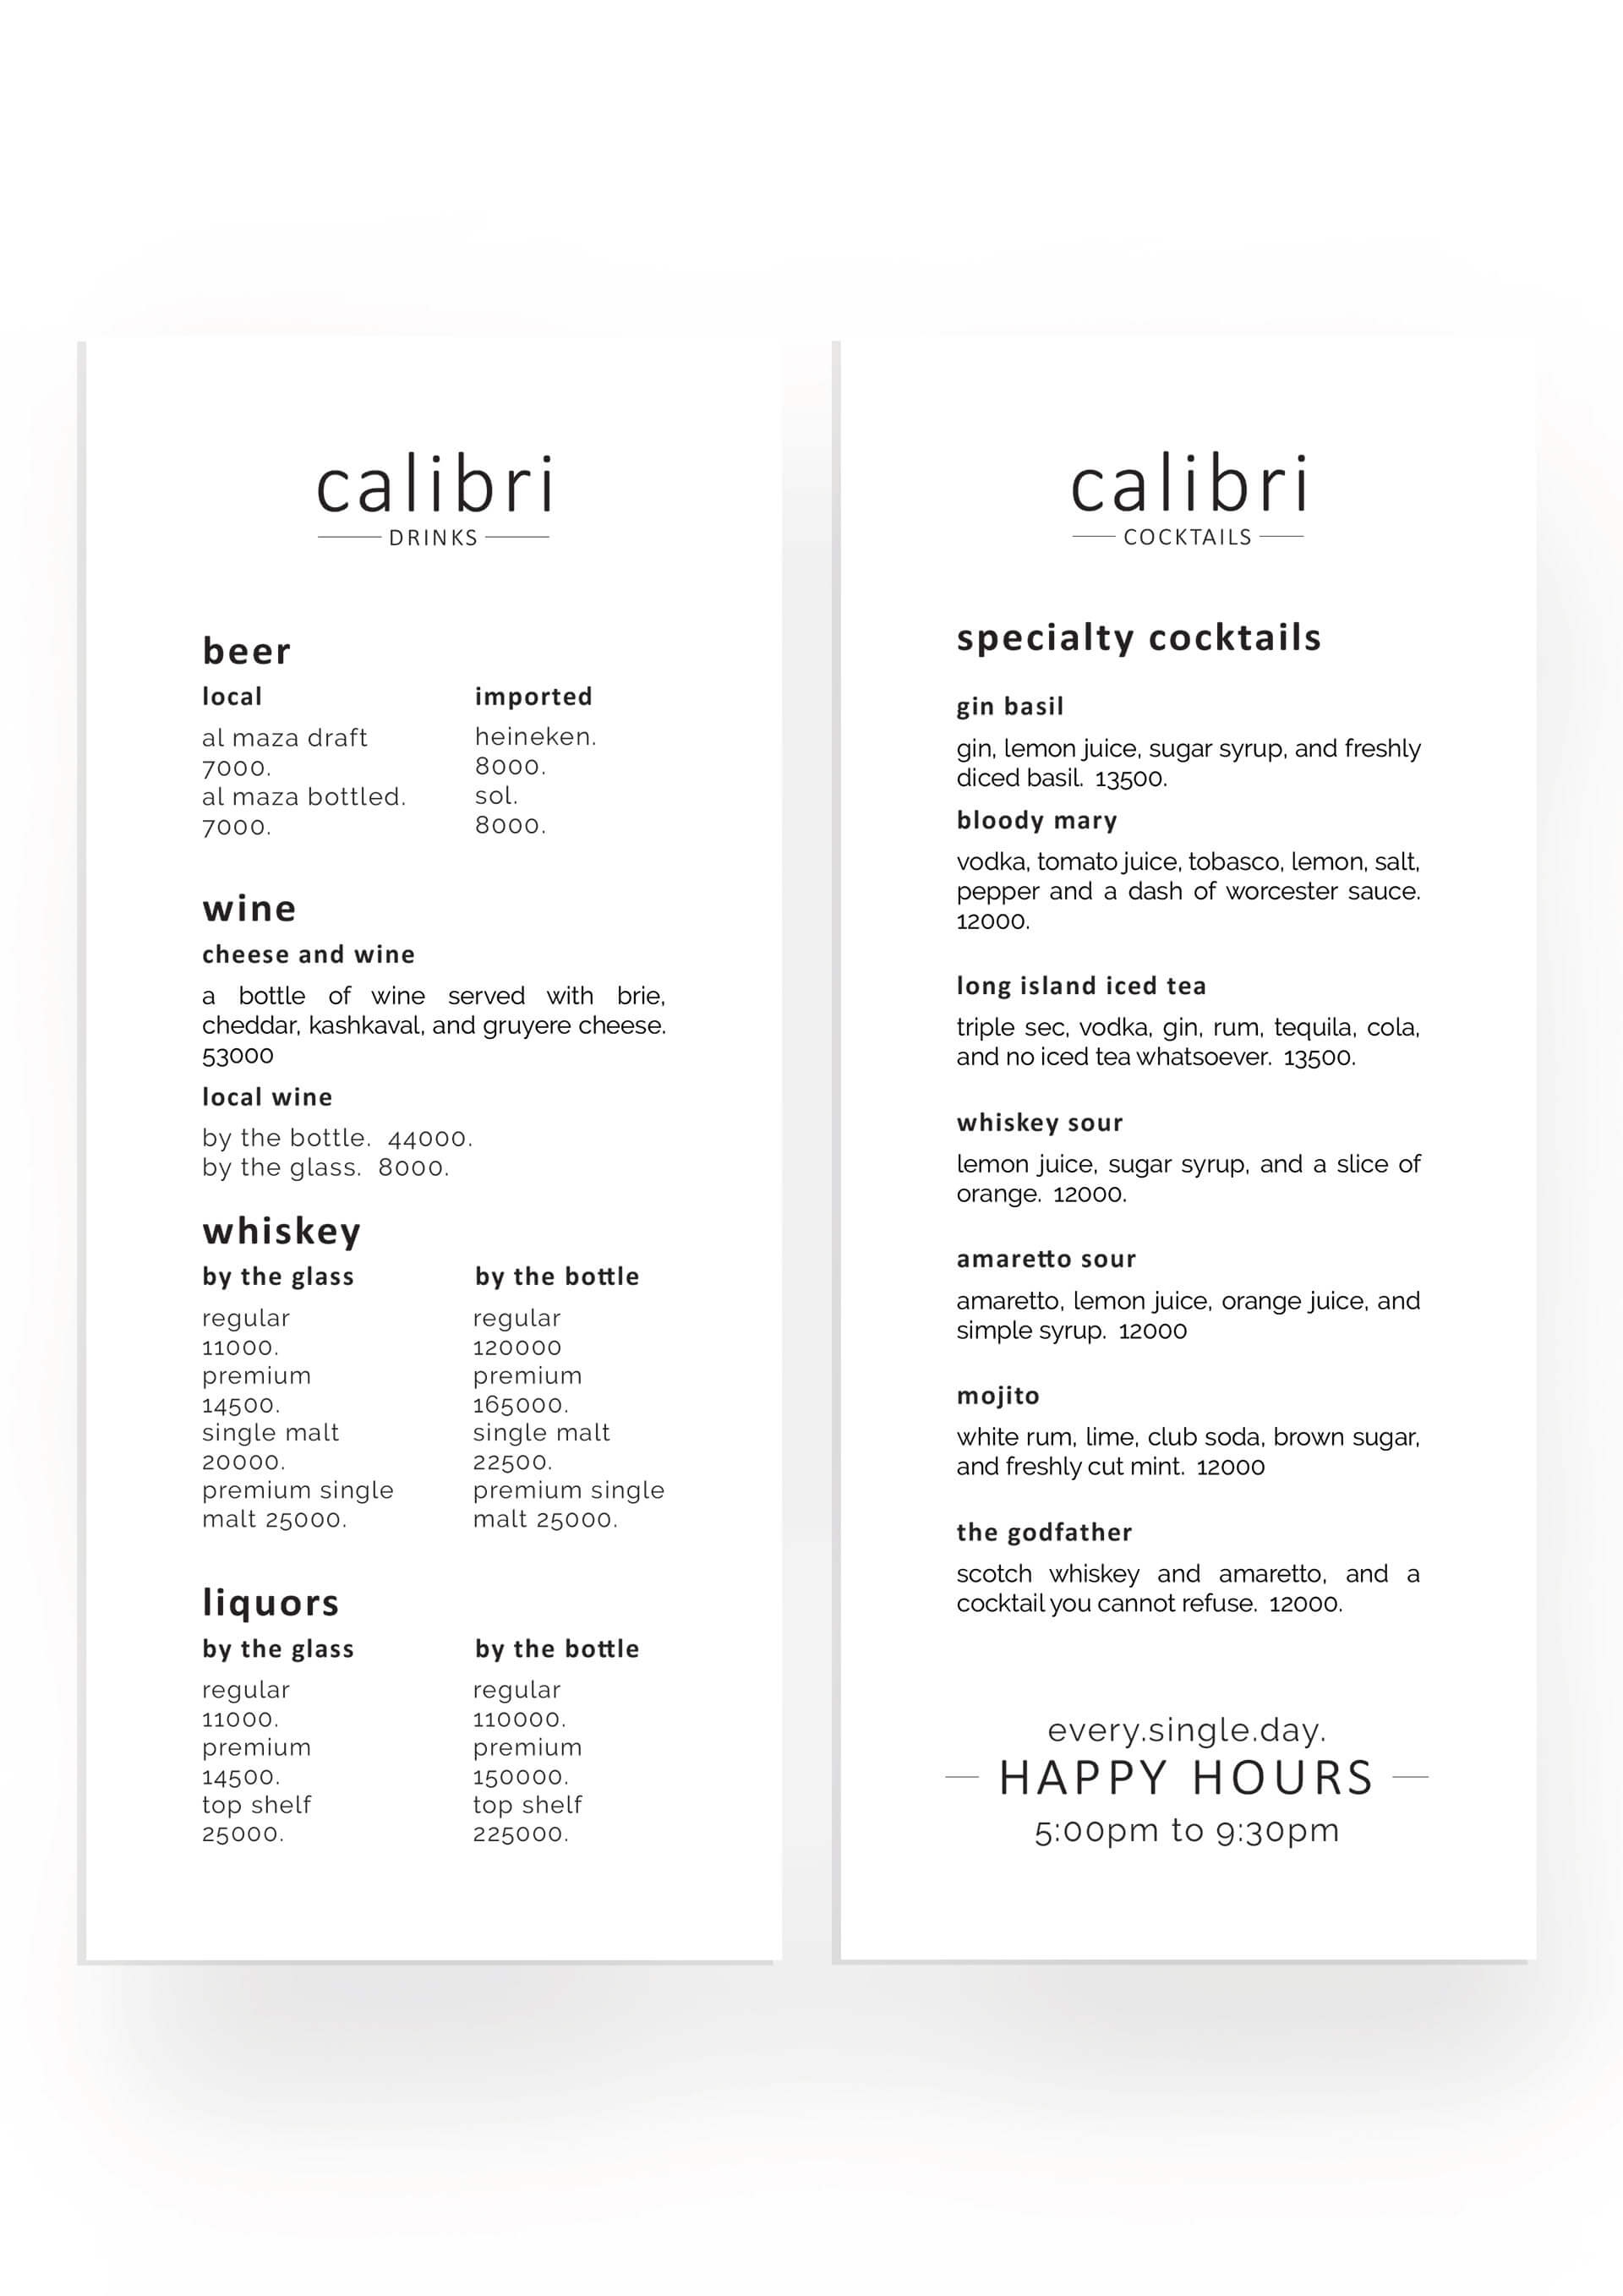 Drinks Menu Design for the Pub with Carefully Studied Layout Design to Encourage Customer Purchase or Conversion